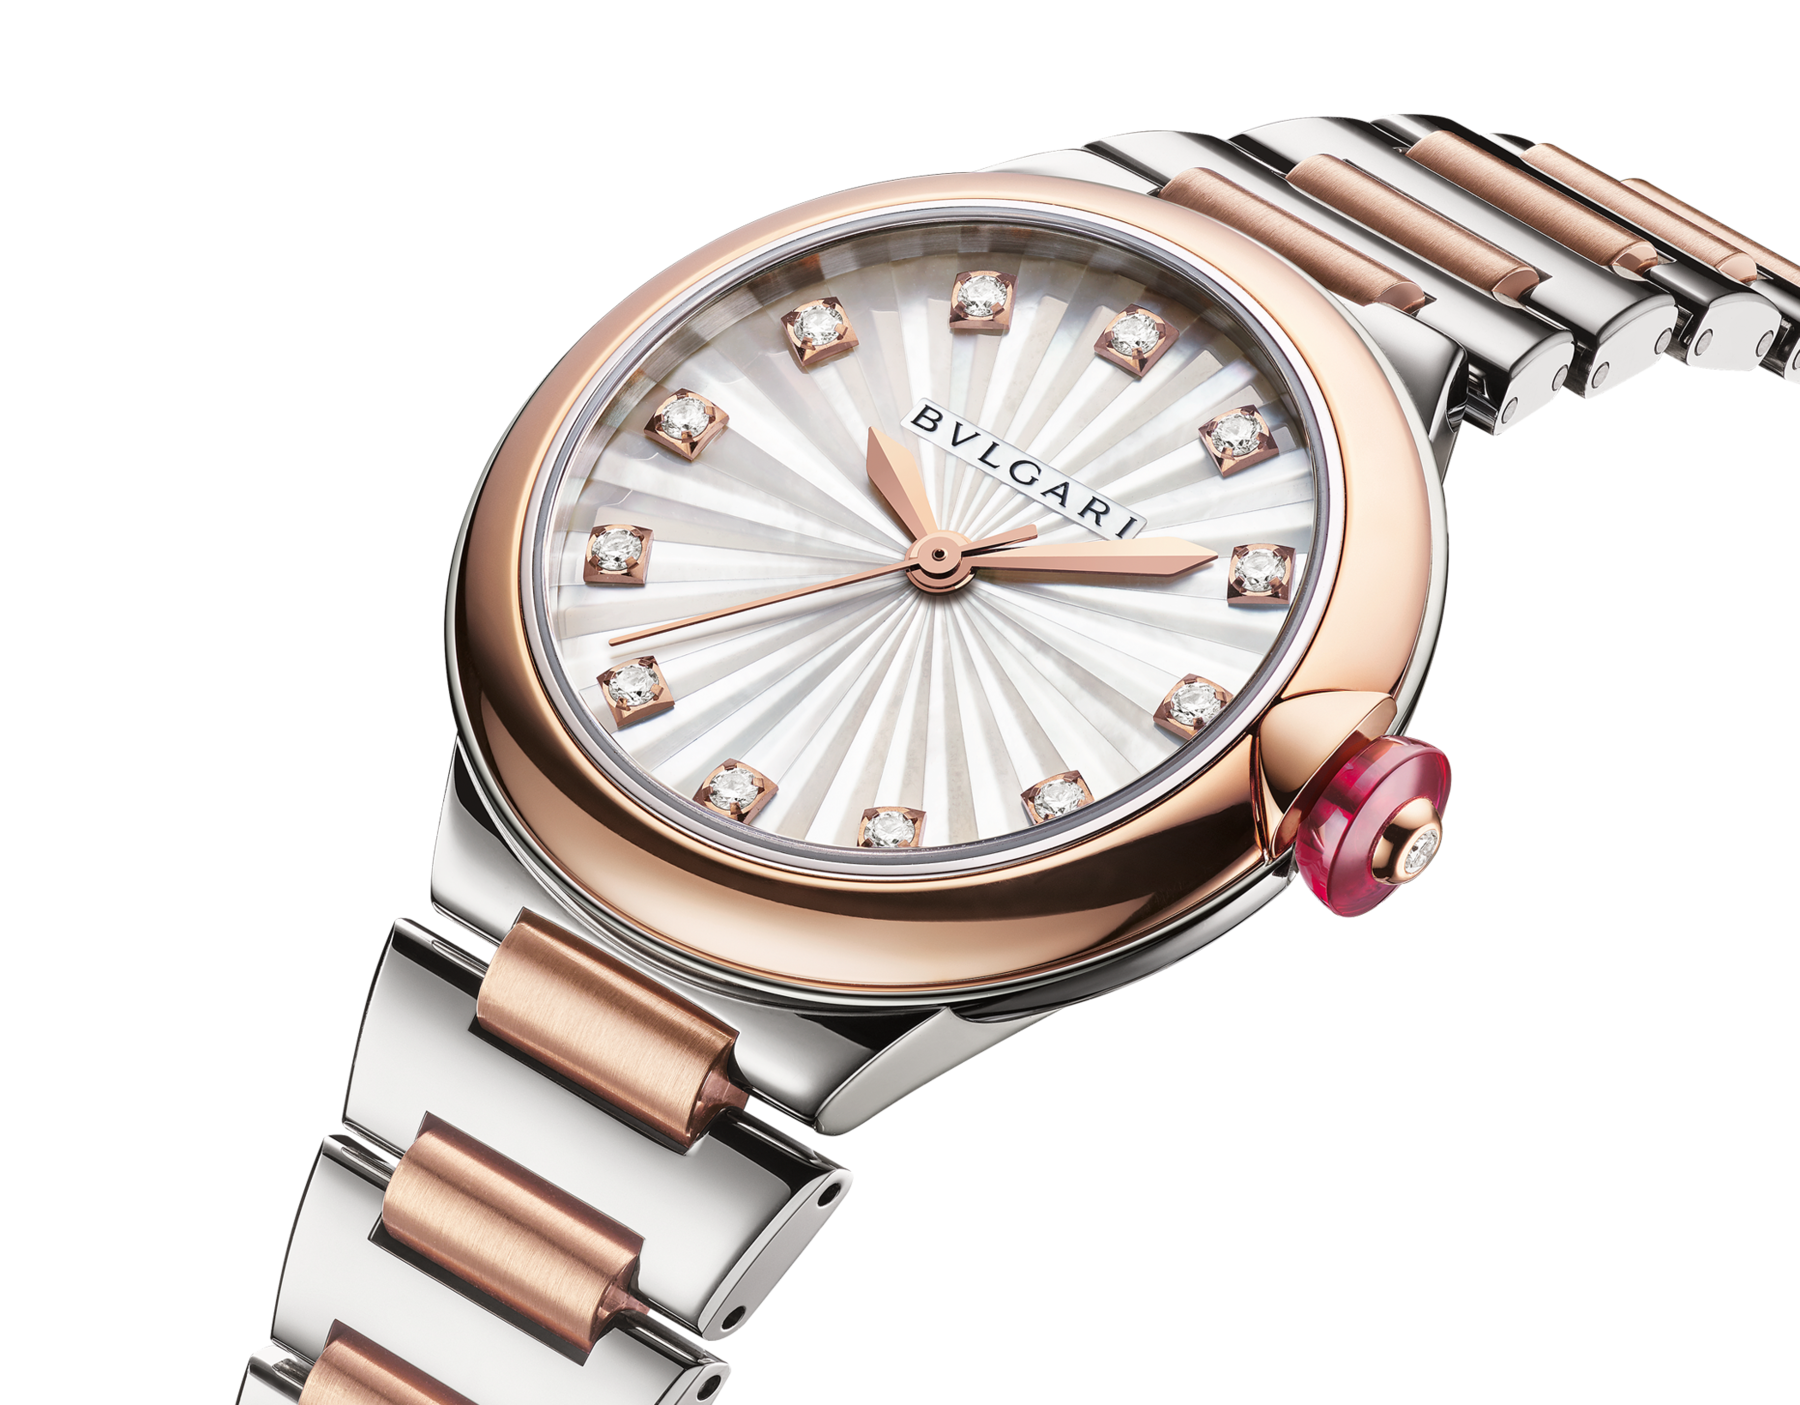 Lvcea Watch Rose Gold And Steel 103730 Watches Bvlgari Official Store